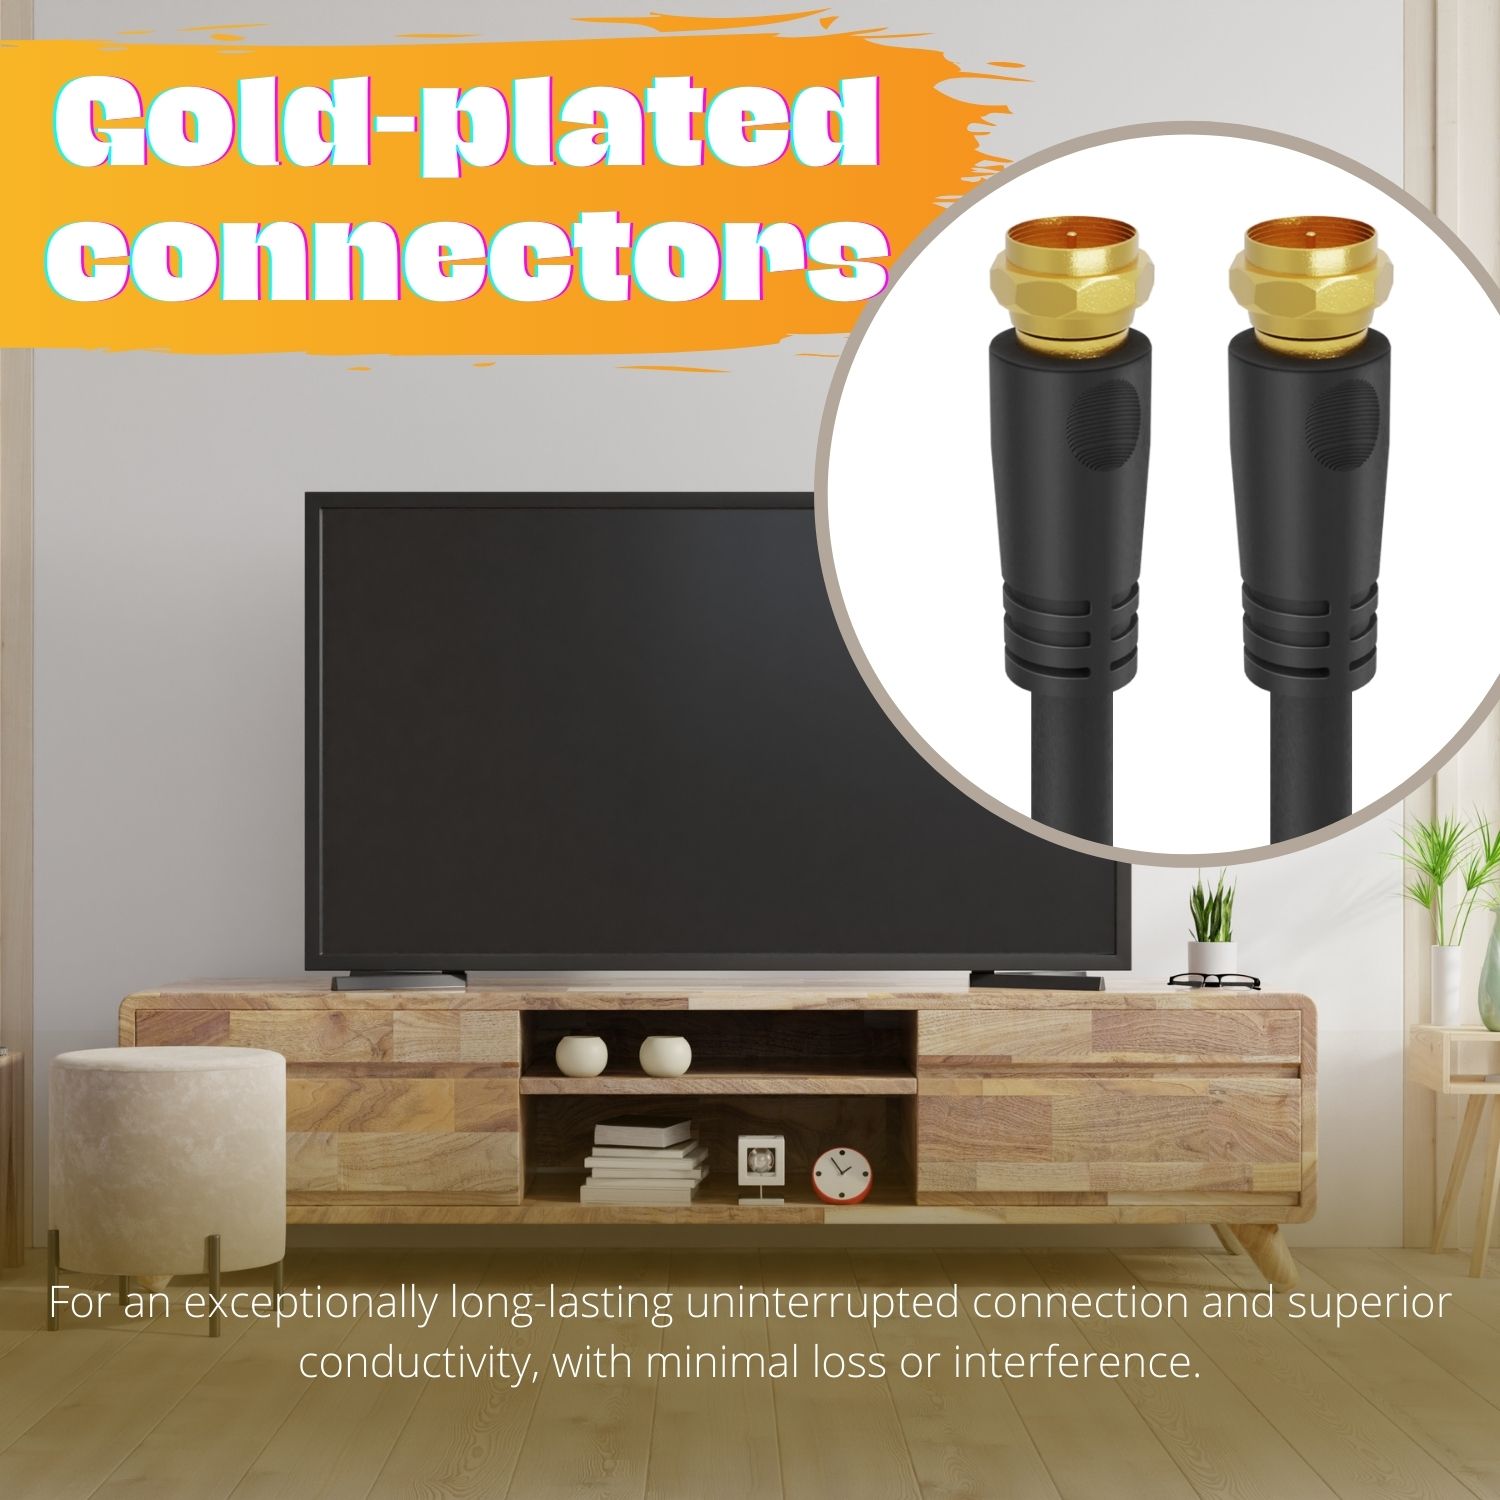 75 Ohm High Impedance - The cable tv coaxial cable is durable, weatherproof, & UV-resistant PVC jacket. Designed for consistent frequency transmission, this RG6 coax extender ensures there's no signal degradation across long distances